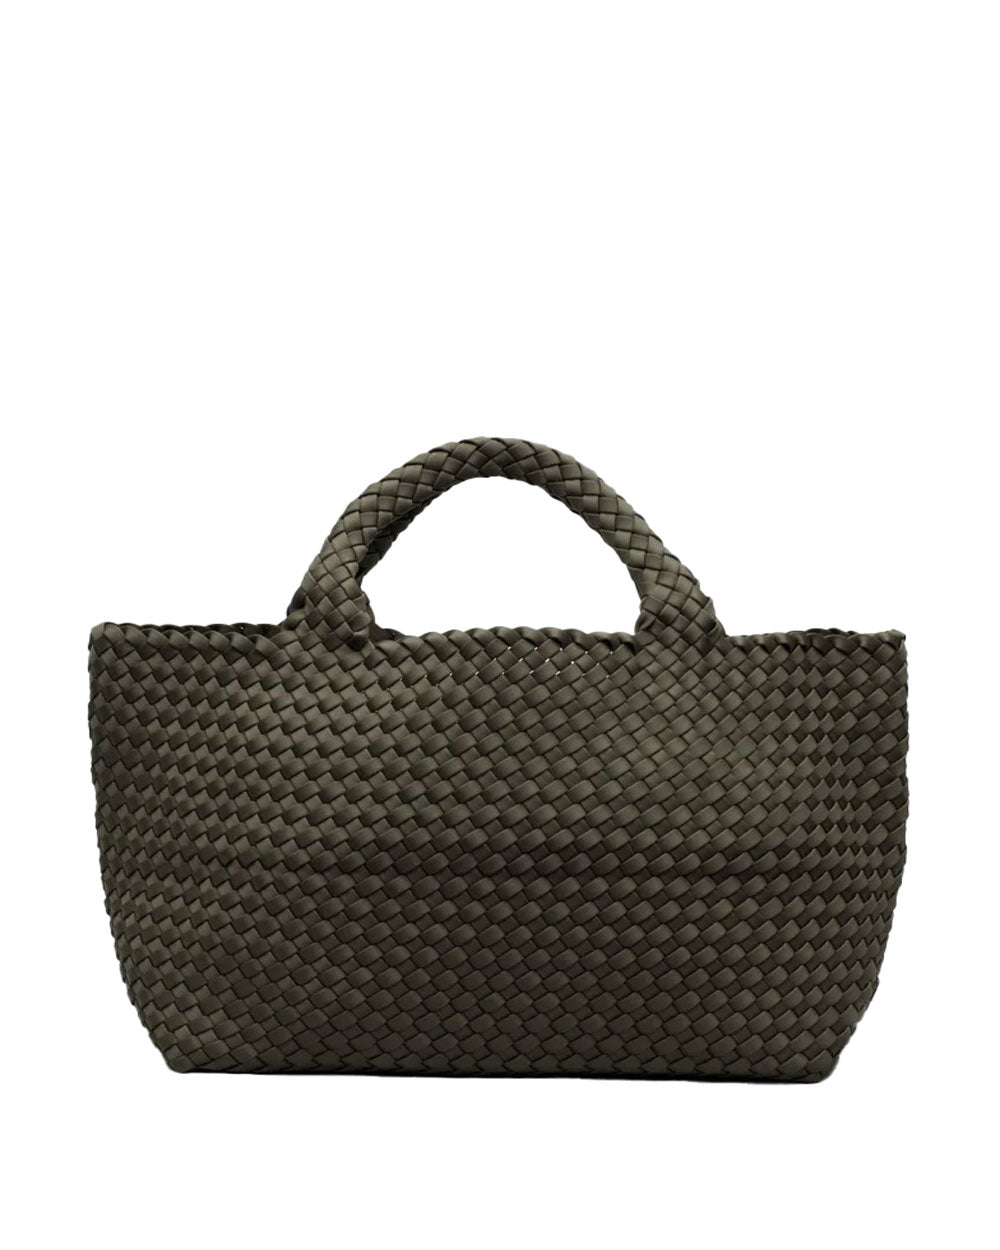 St. Barths Medium Tote in Olive